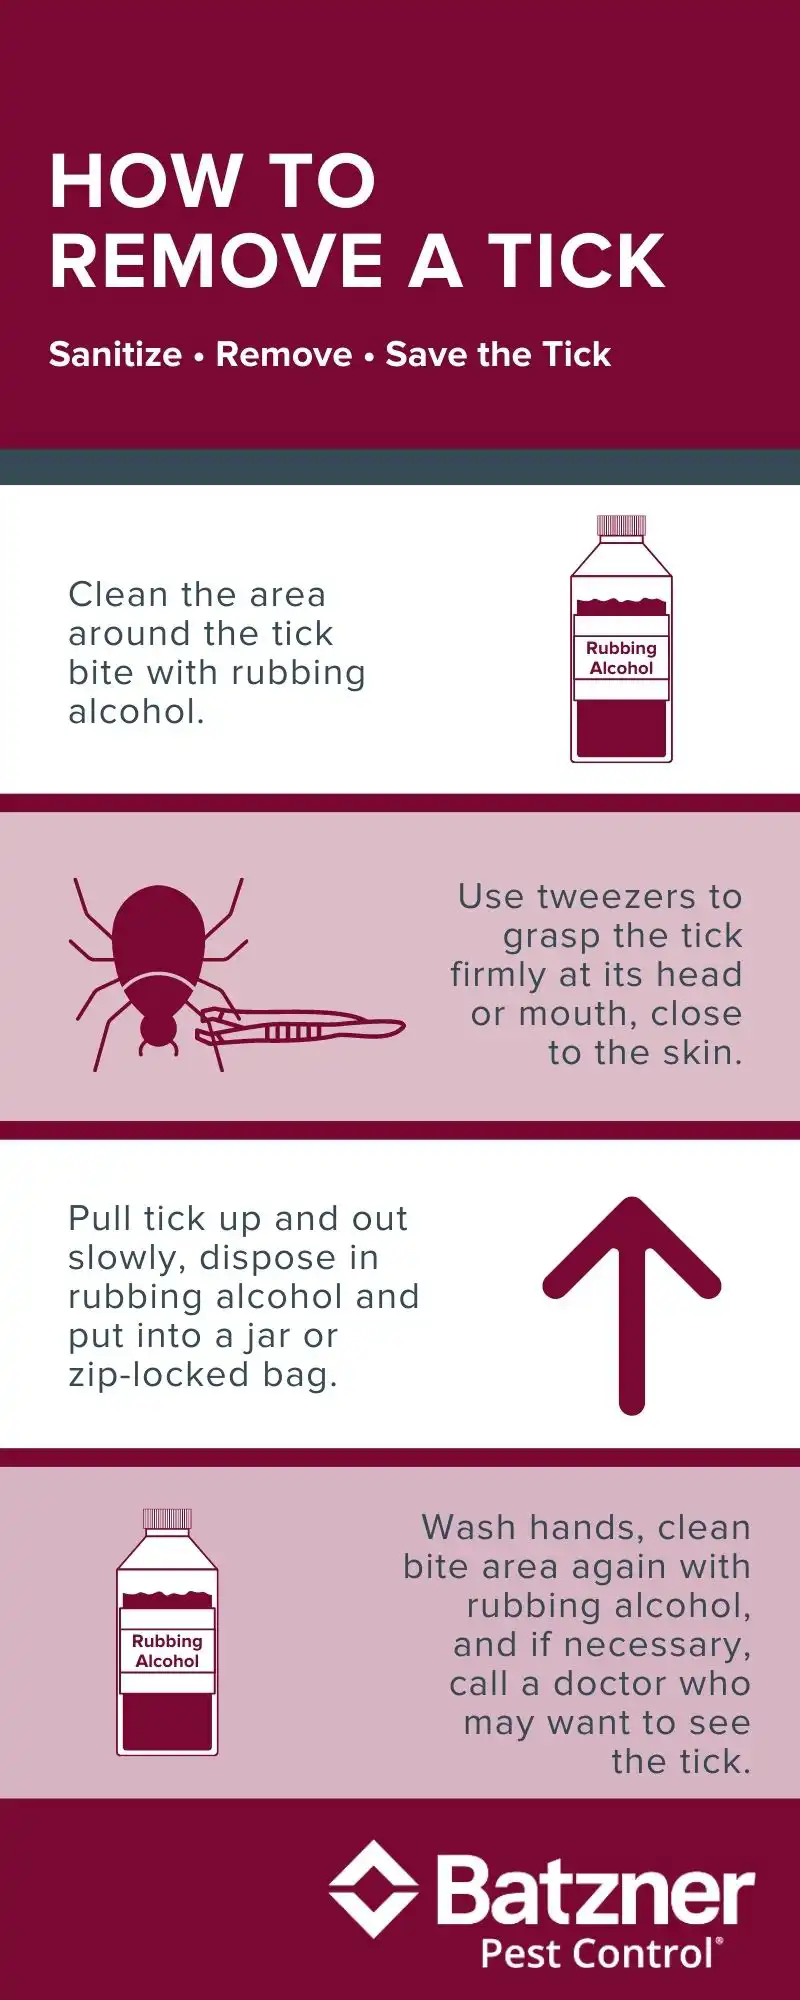 Tick removal guide - Batzner Pest Control in Wisconsin